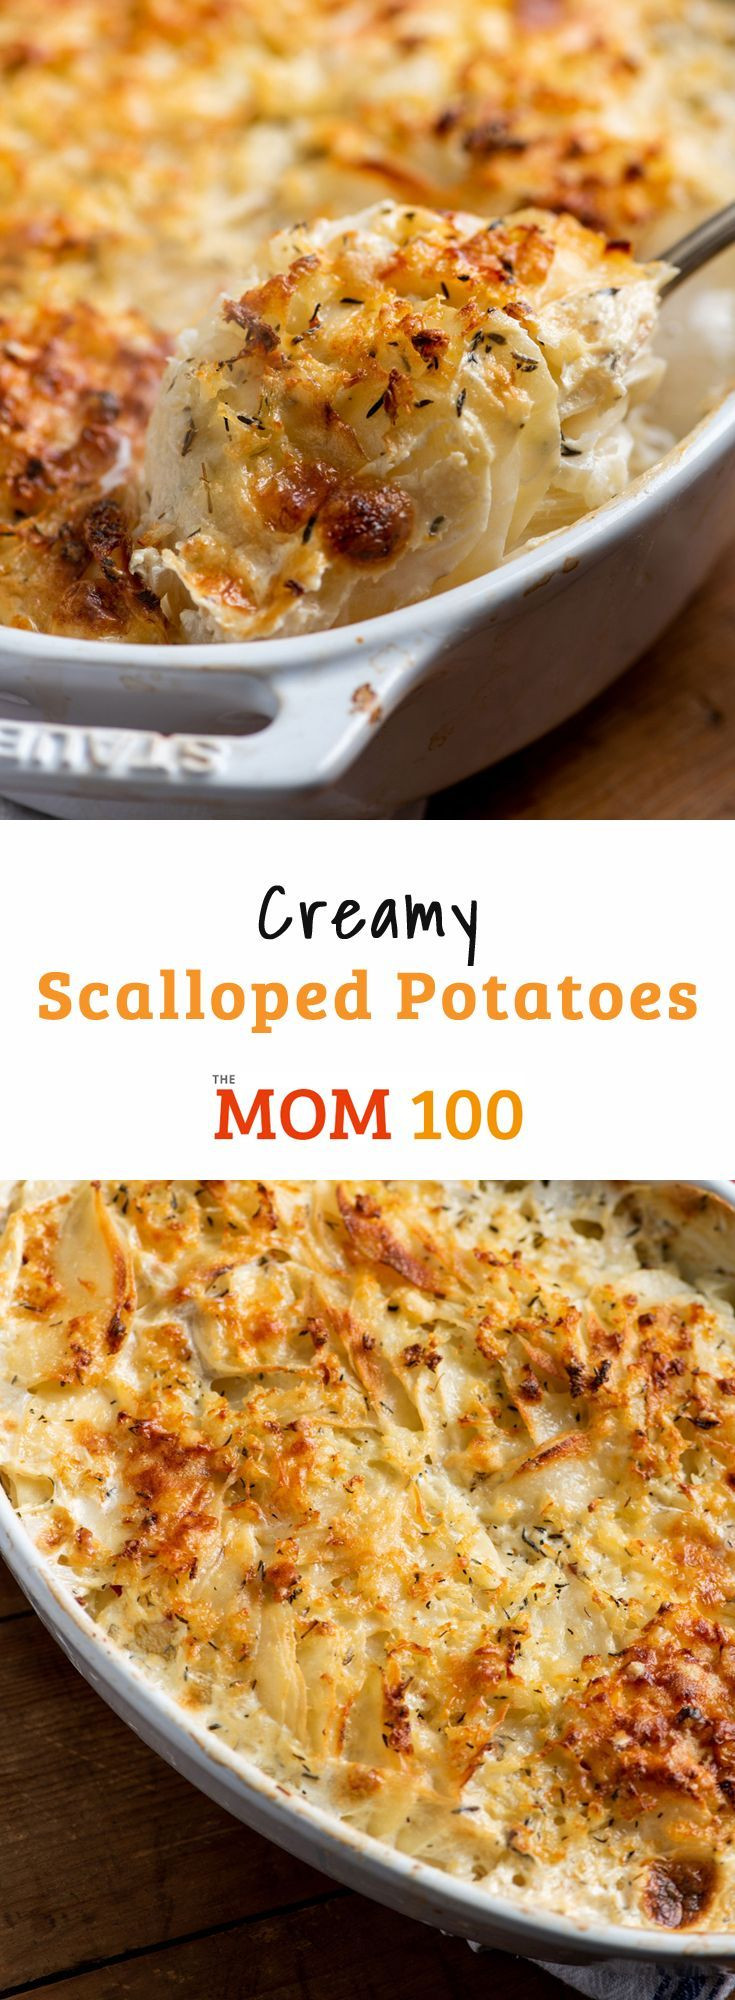 Gourmet Scalloped Potatoes
 Creamy Scalloped Potatoes If you need to make a meal